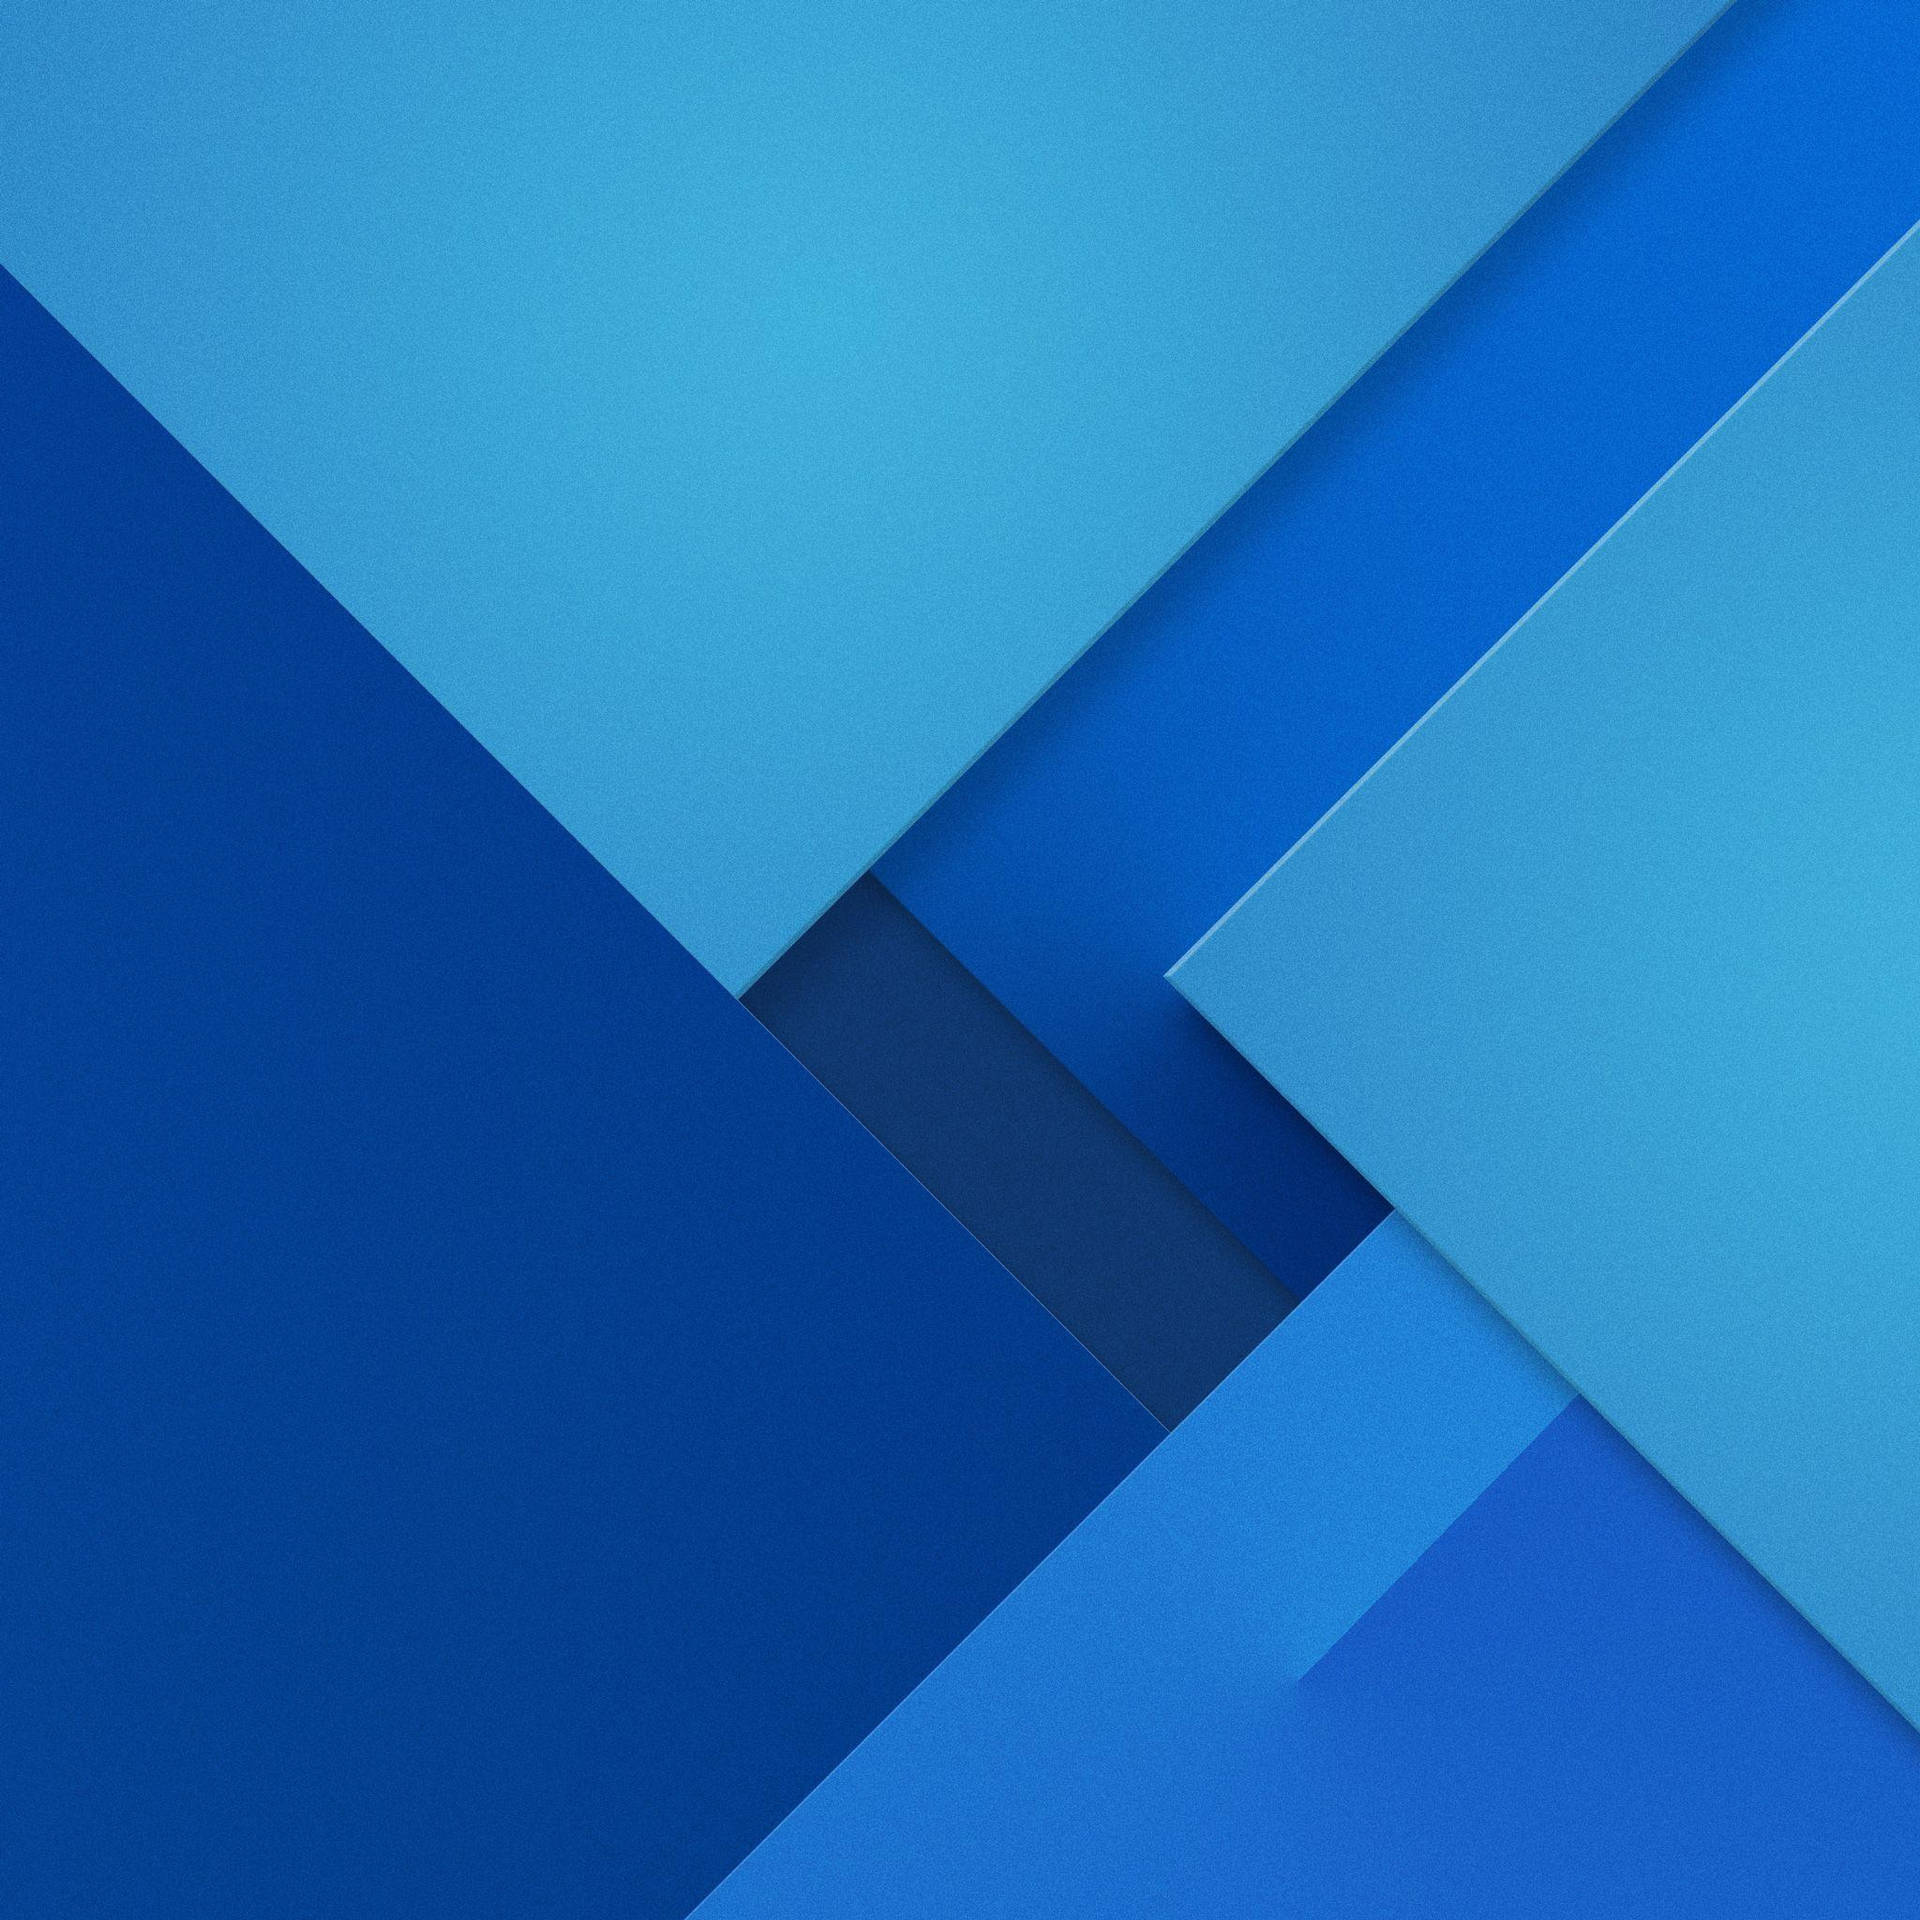 Blue Angled Lines Samsung Galaxy Tablet Wallpaper